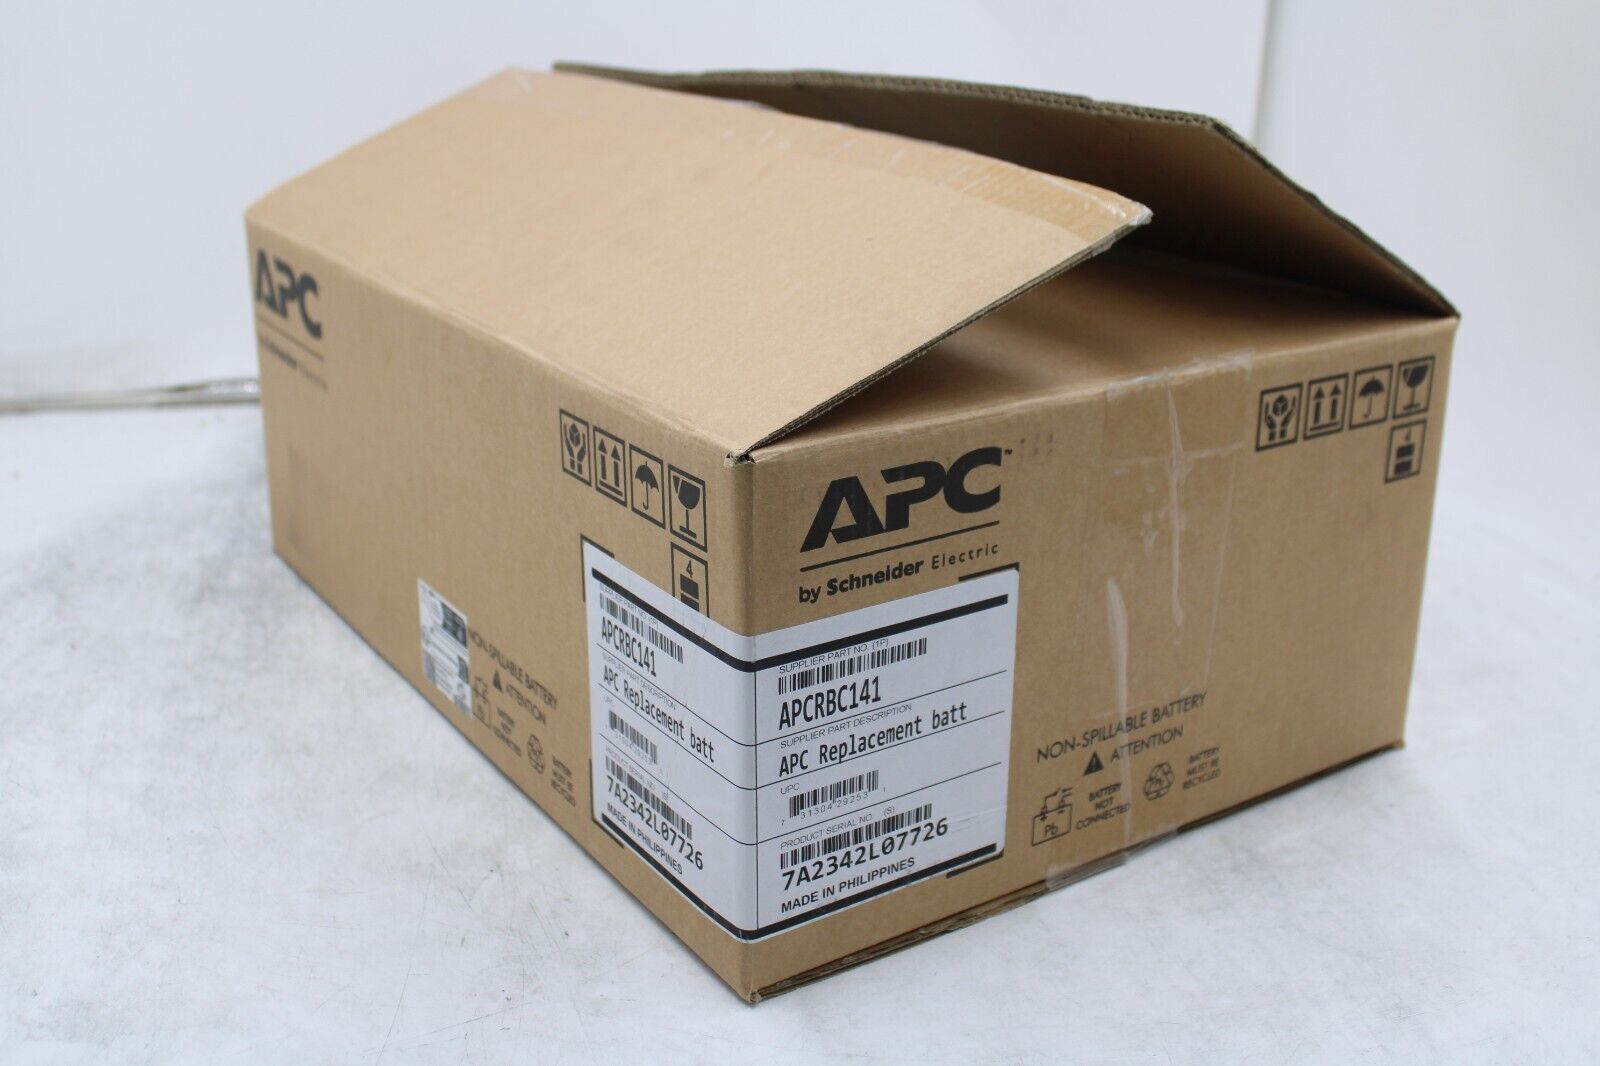 APC by Schneider Electric Replacement Battery Cartridge APCRBC141 TESTED